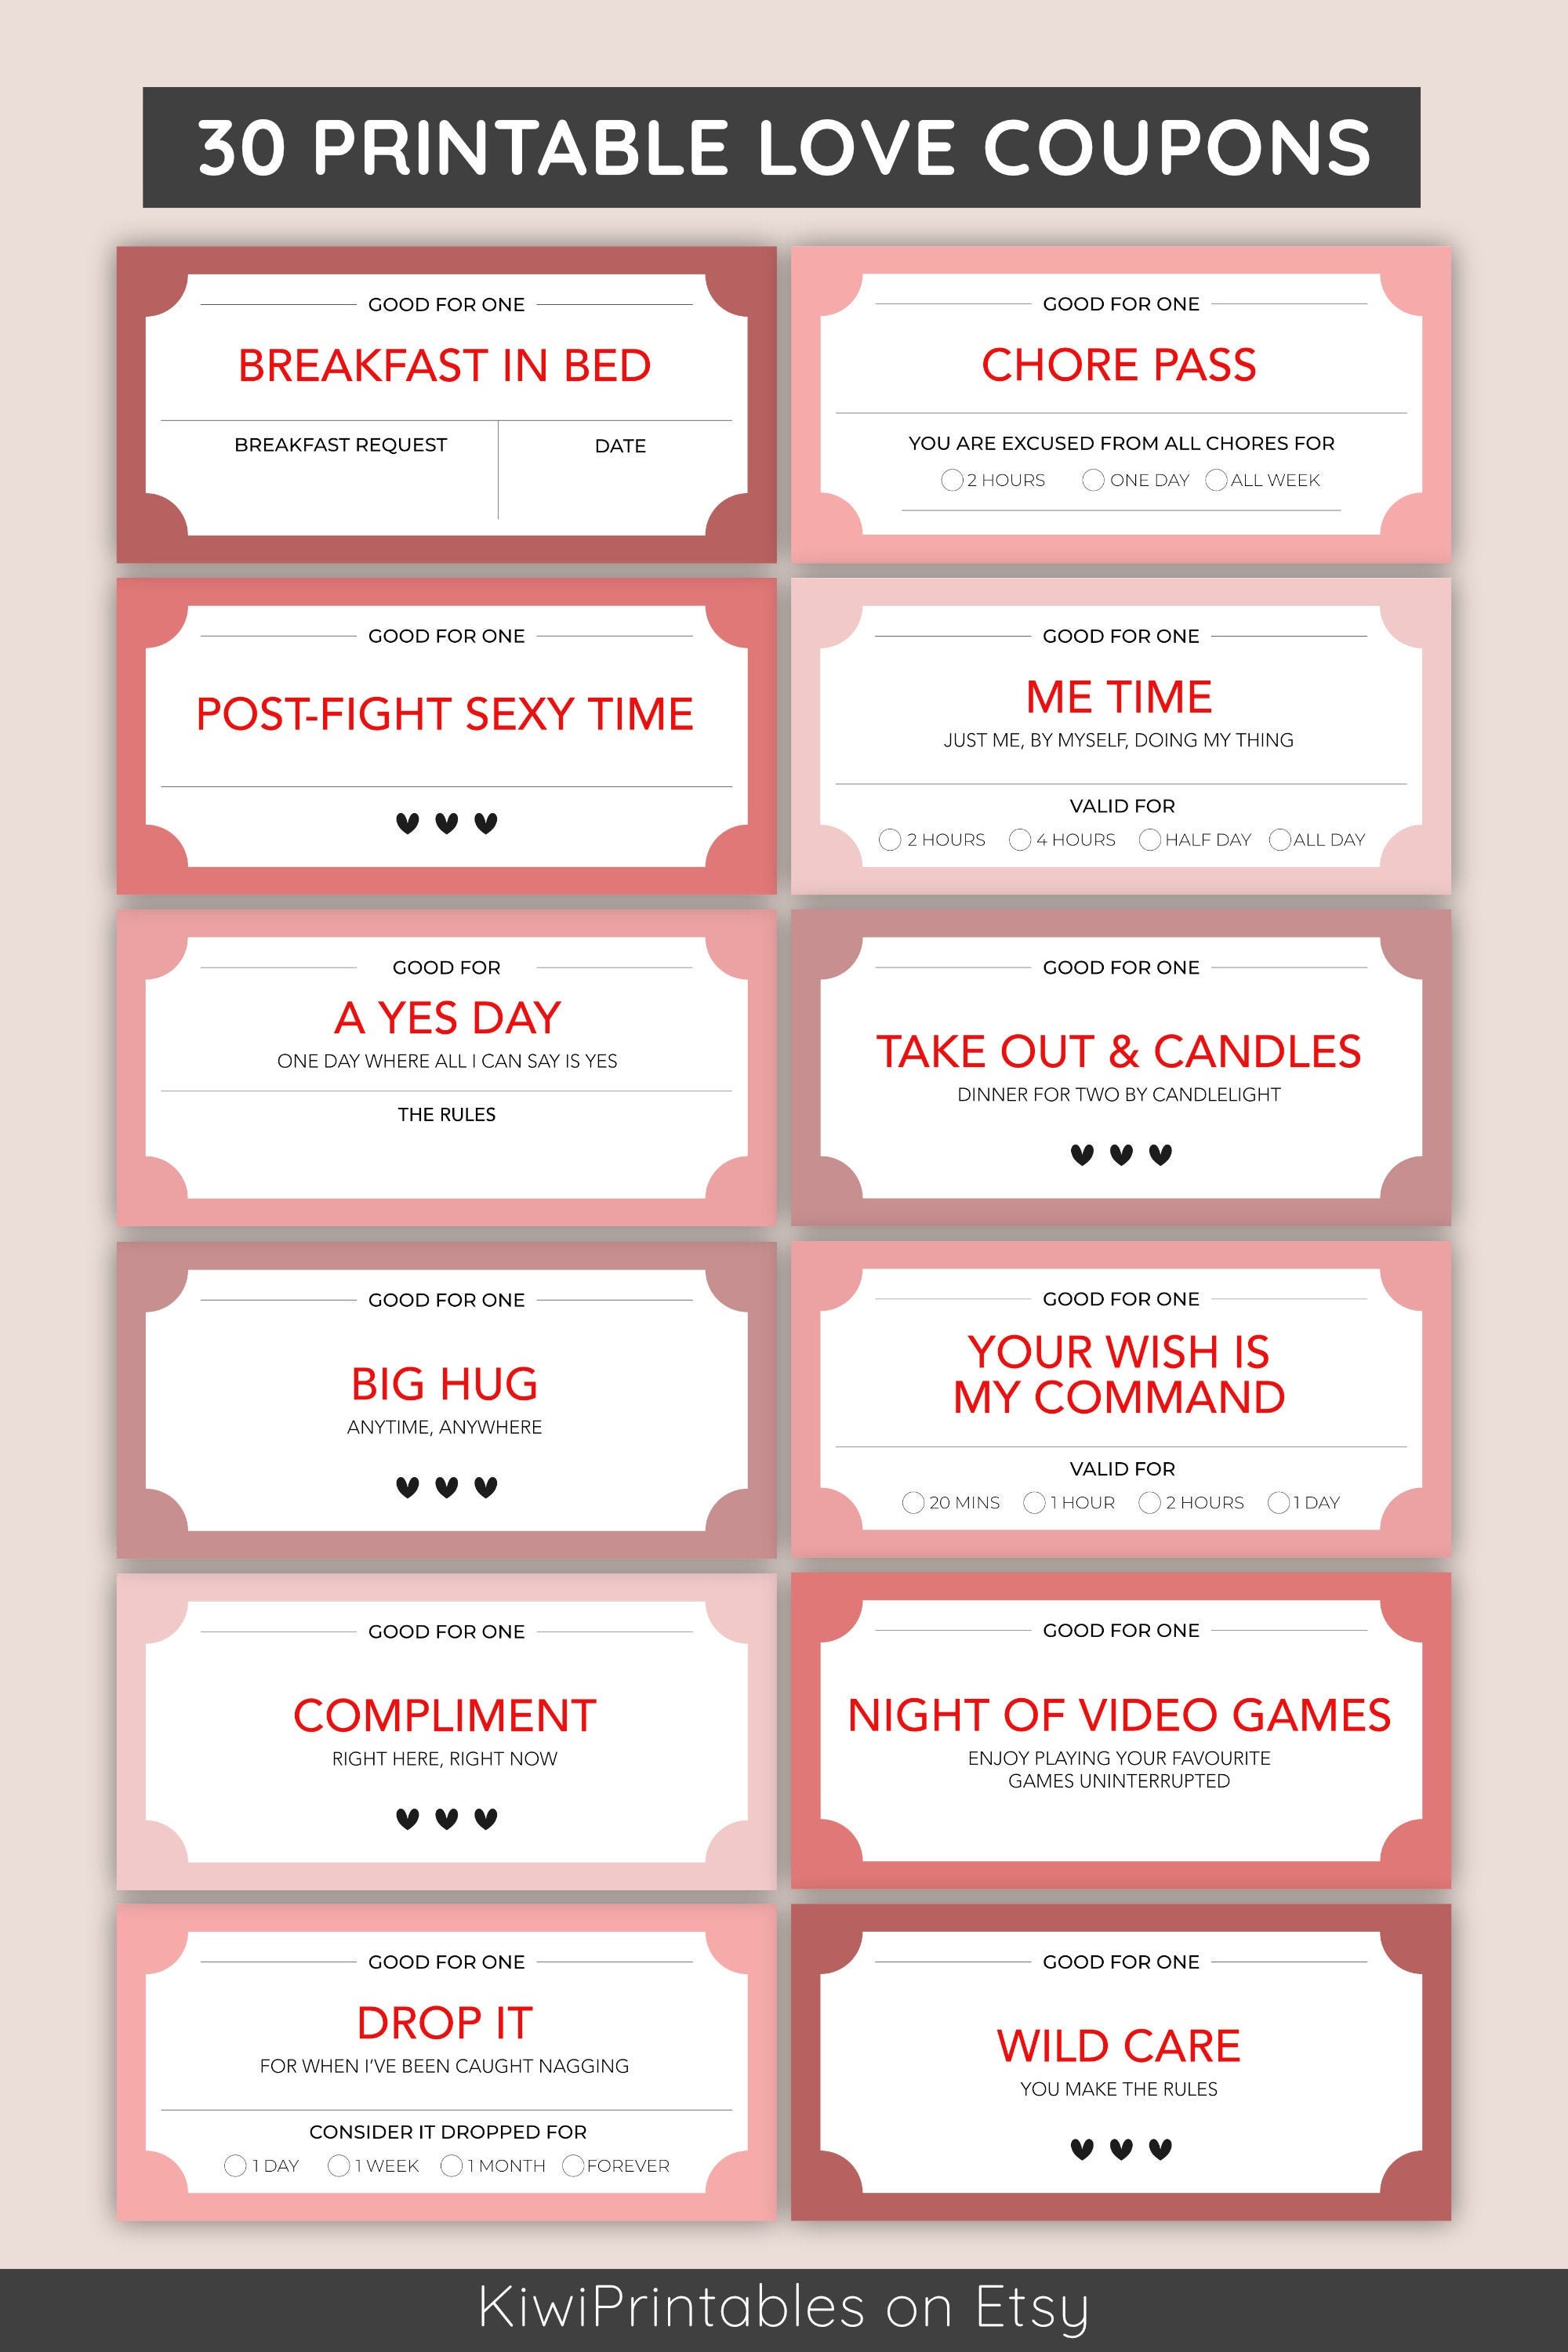 30-fun-love-coupon-book-valentines-day-coupons-love-coupons-etsy-uk